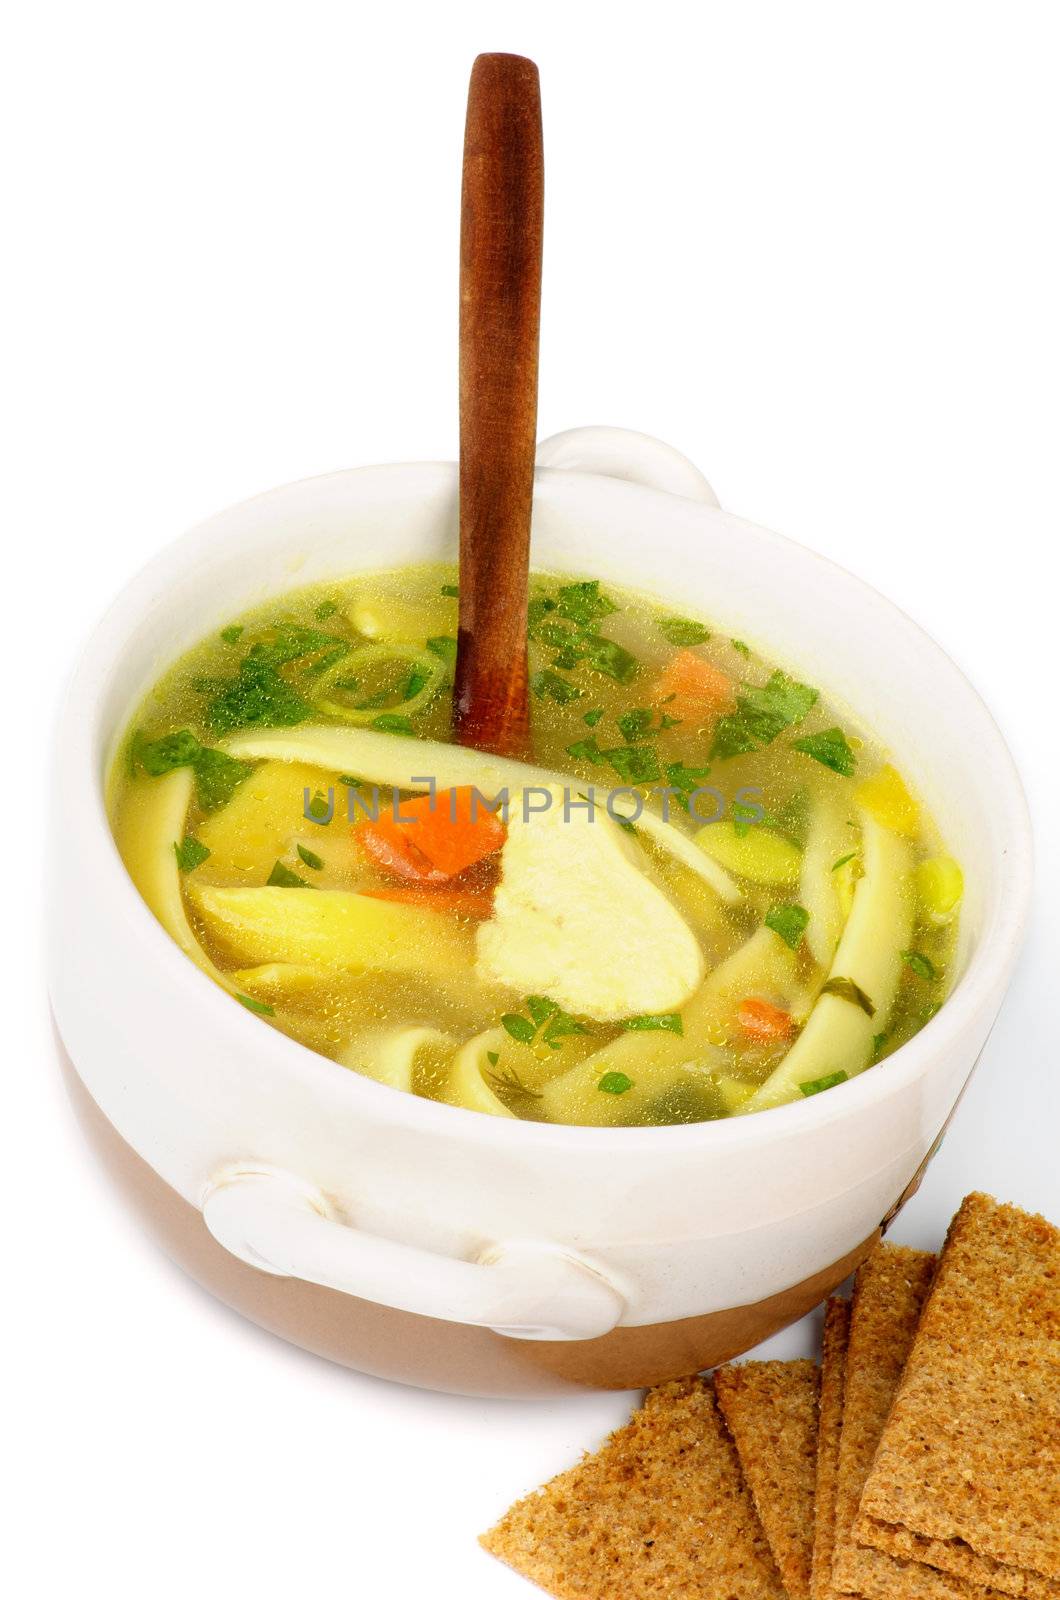 Chicken Noodle Soup with Parsley and Carrot in White Bowl with Wooden Spoon and Crispy Bread closeup on white background